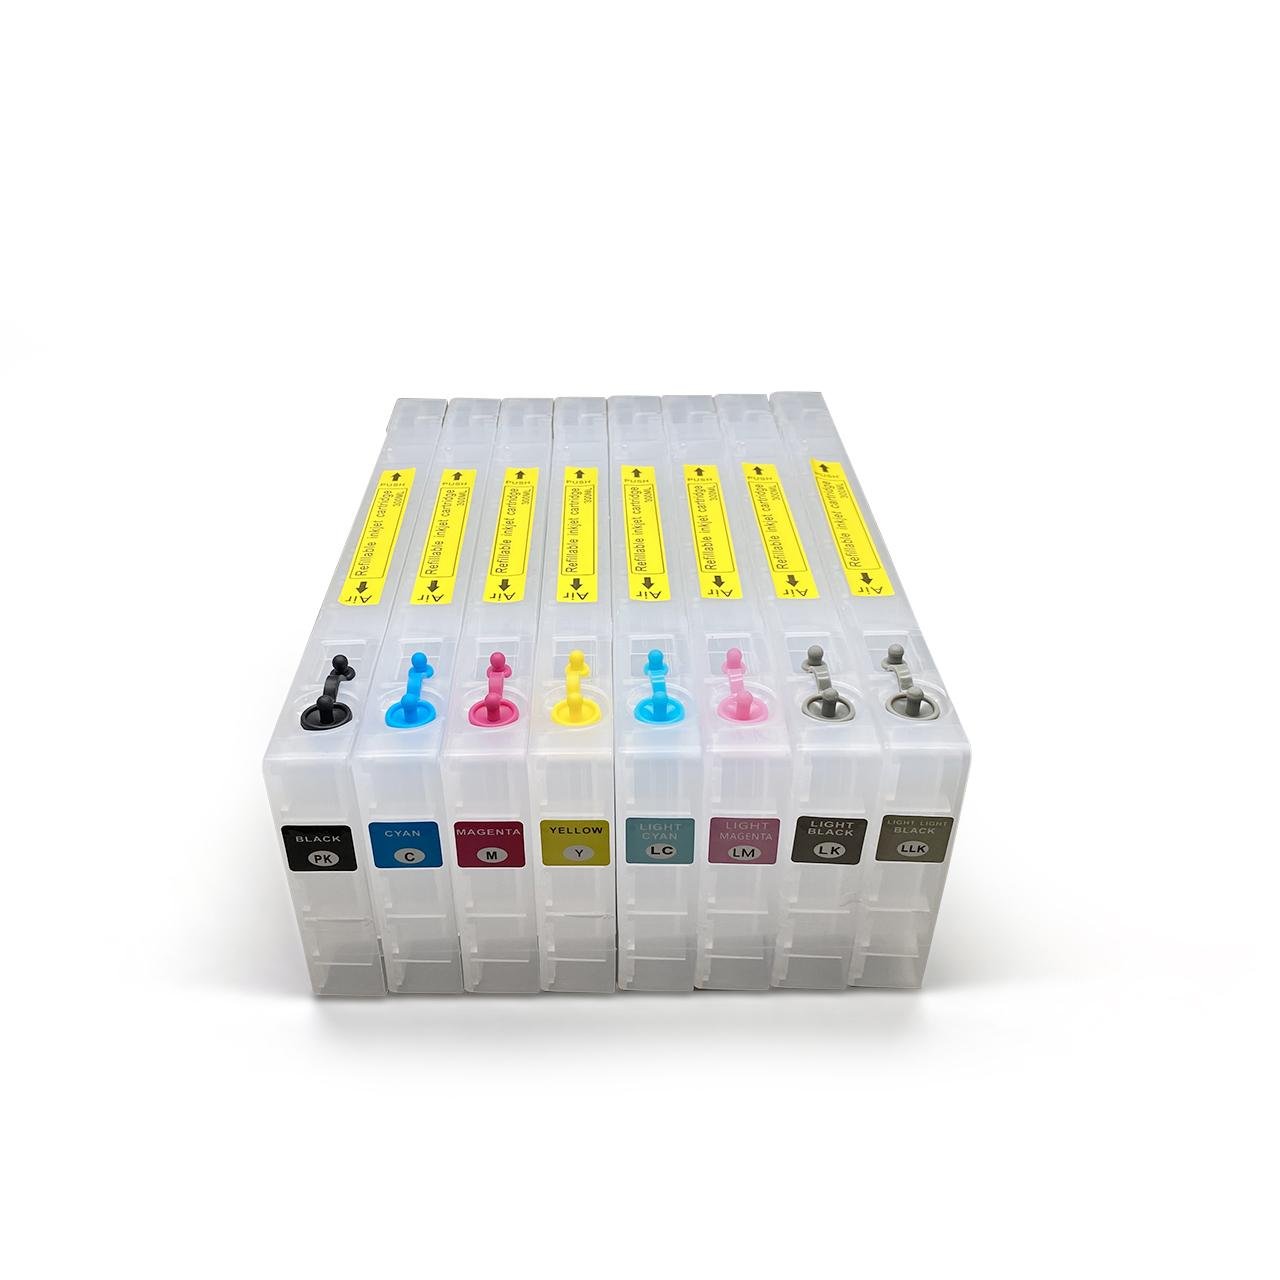 Refillable cartridges for Pro 4880 4800 4000 7600 00 7880 9880 7800 9800 7400